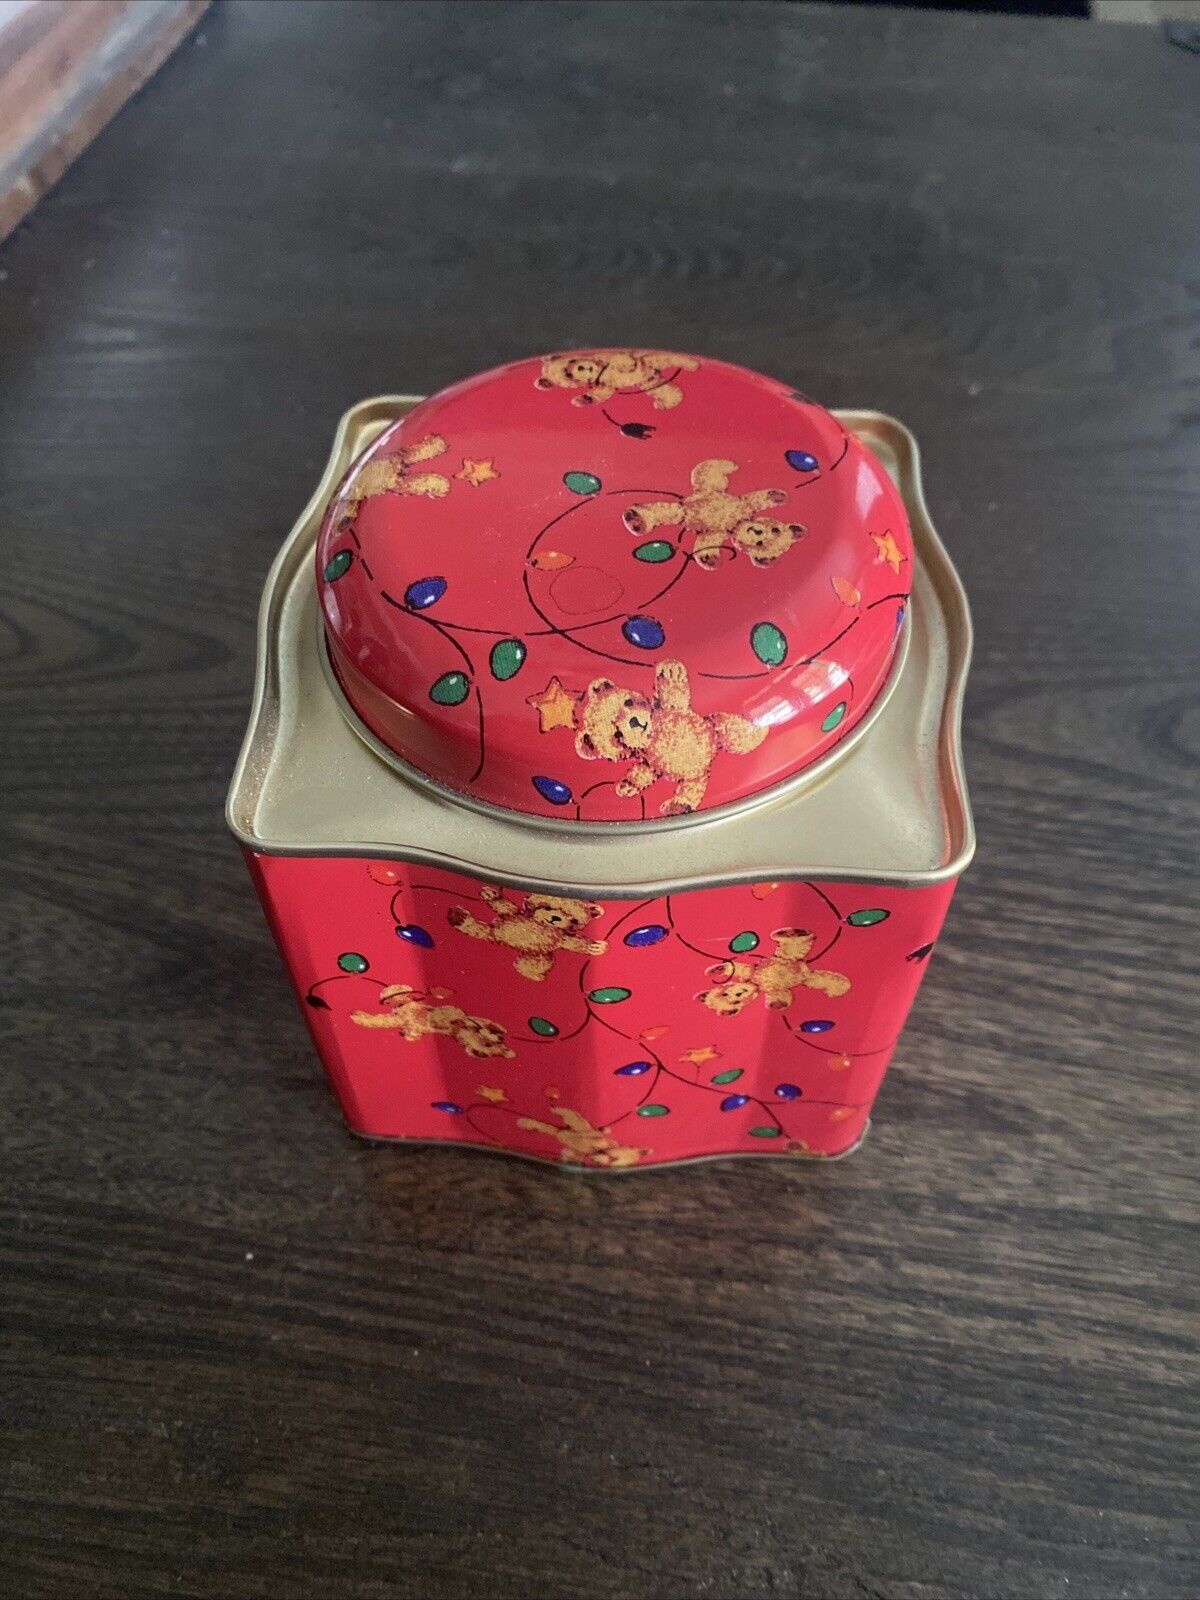 Cute Vintage Teddy Bear Print Container Tin Empty Box Made in Hong Kong